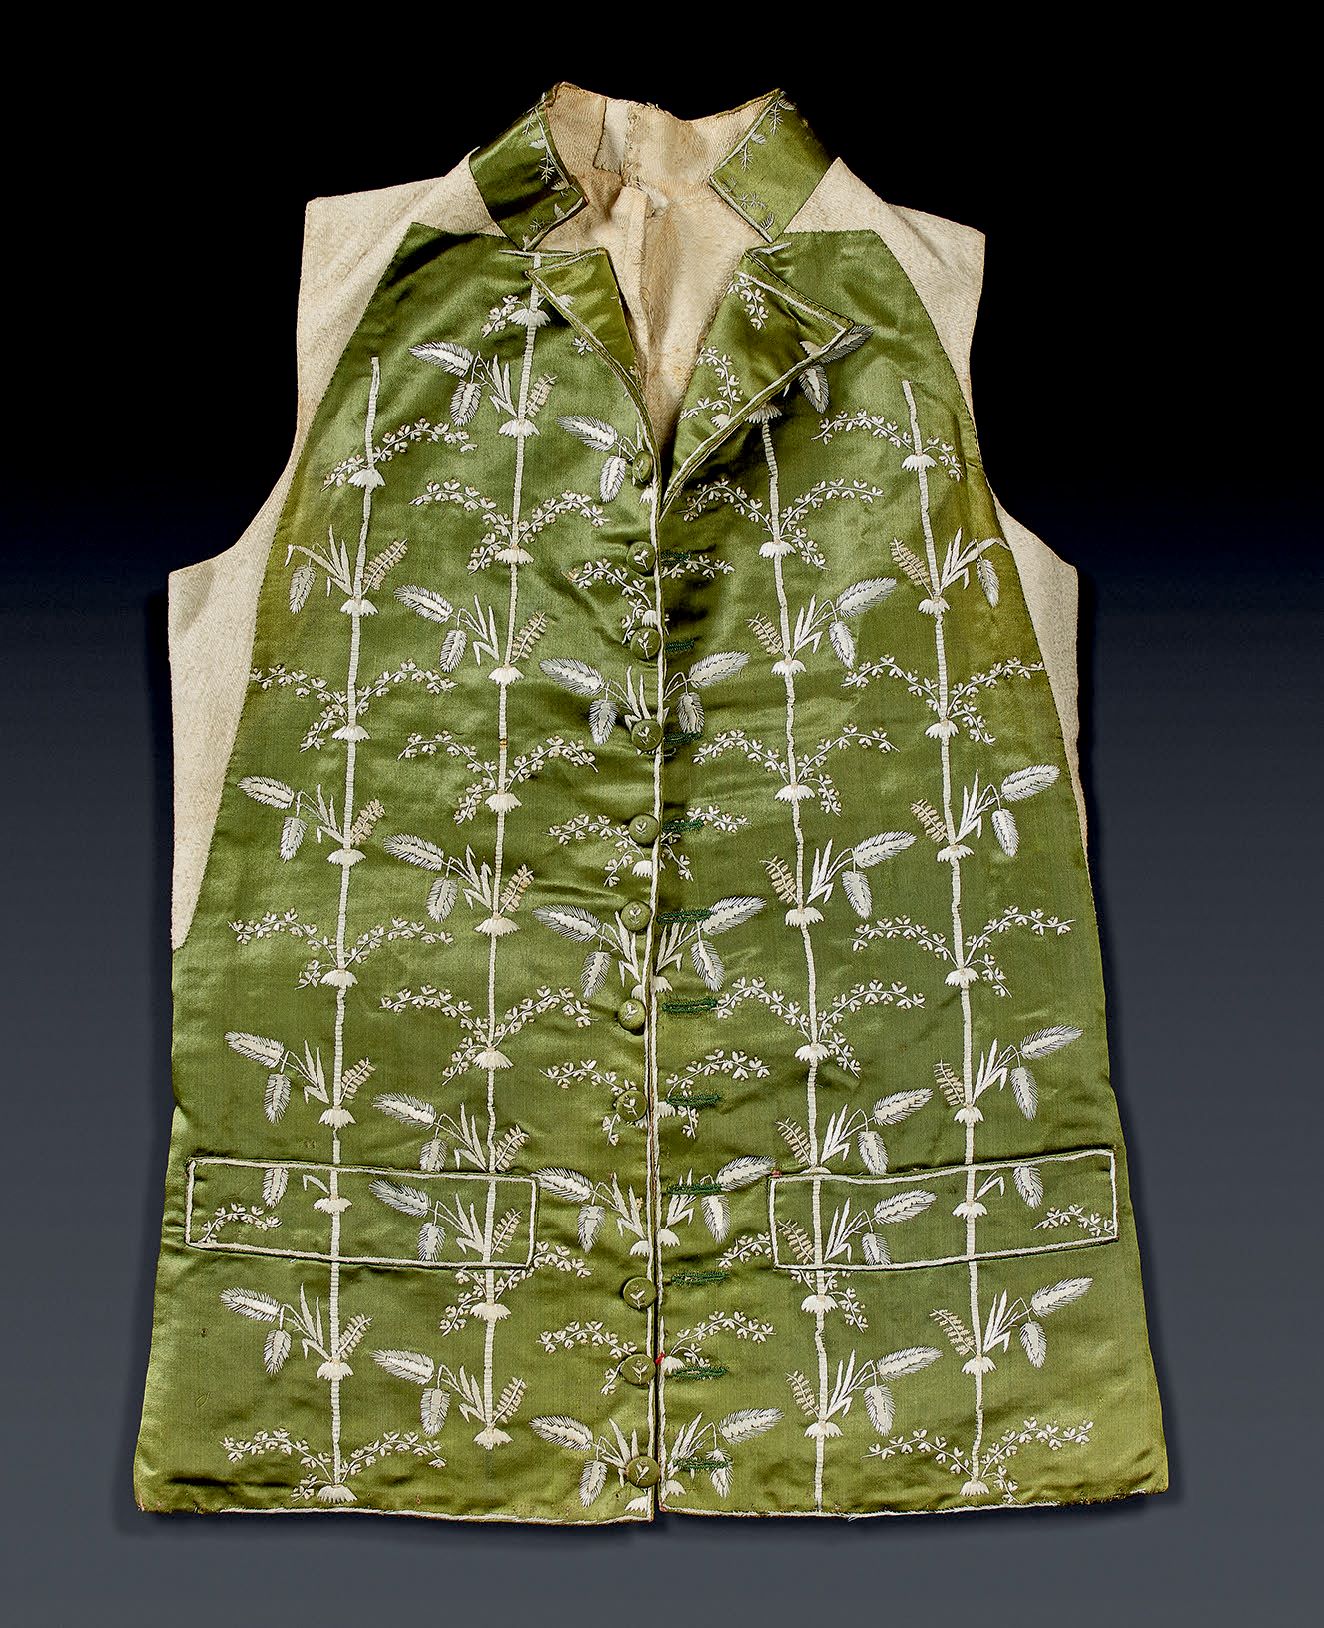 Null Straight embroidered silk vest, Consulate or Empire period.
Olive green sil&hellip;